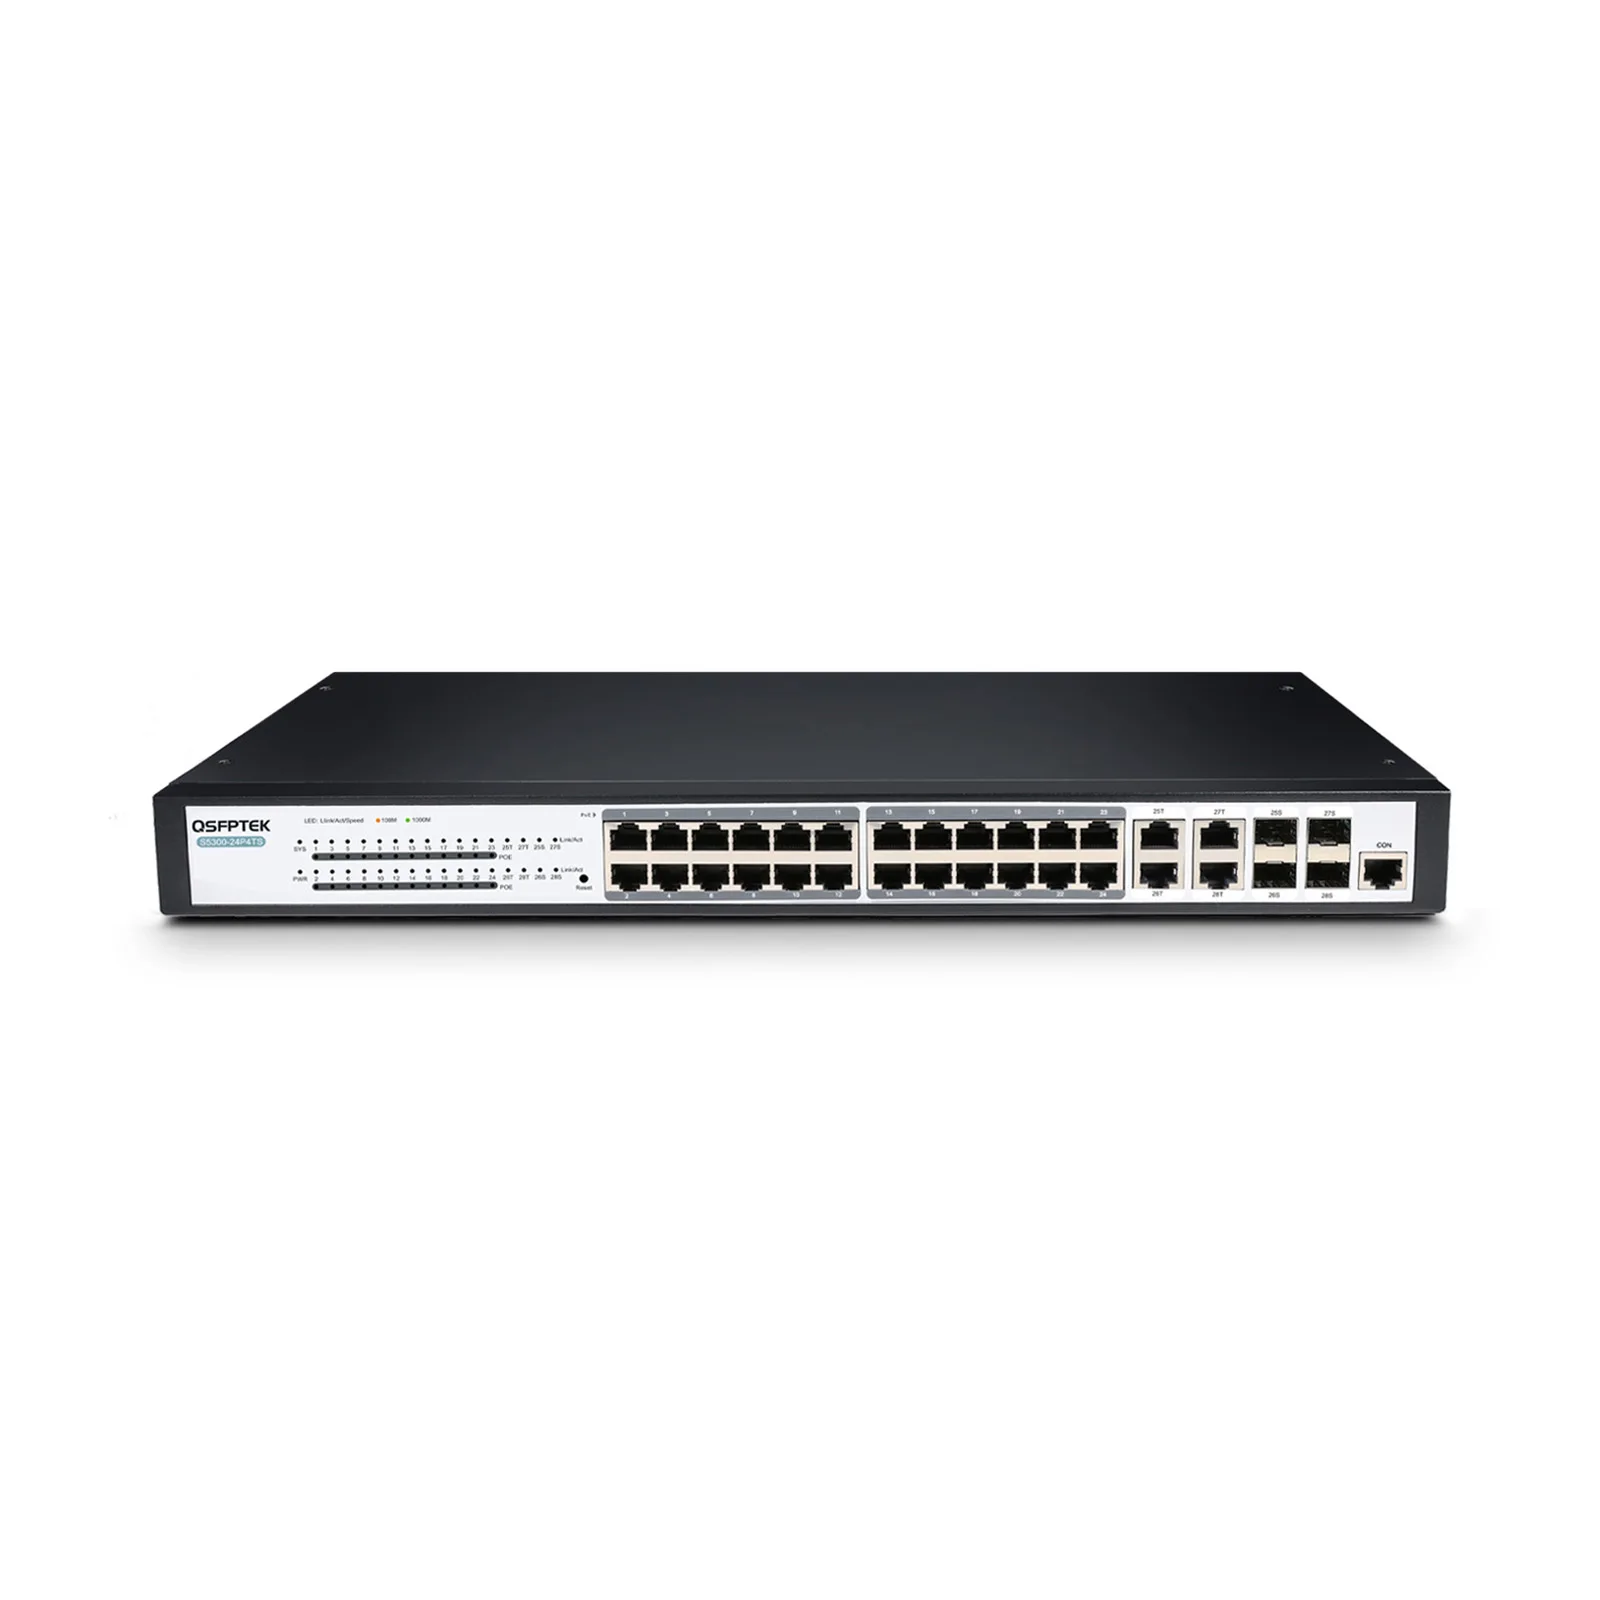 8 Port Unmanaged Industrial Gigabit Power over Ethernet Switch - 802.3af/at  PoE+ Switch - Wall Mountable